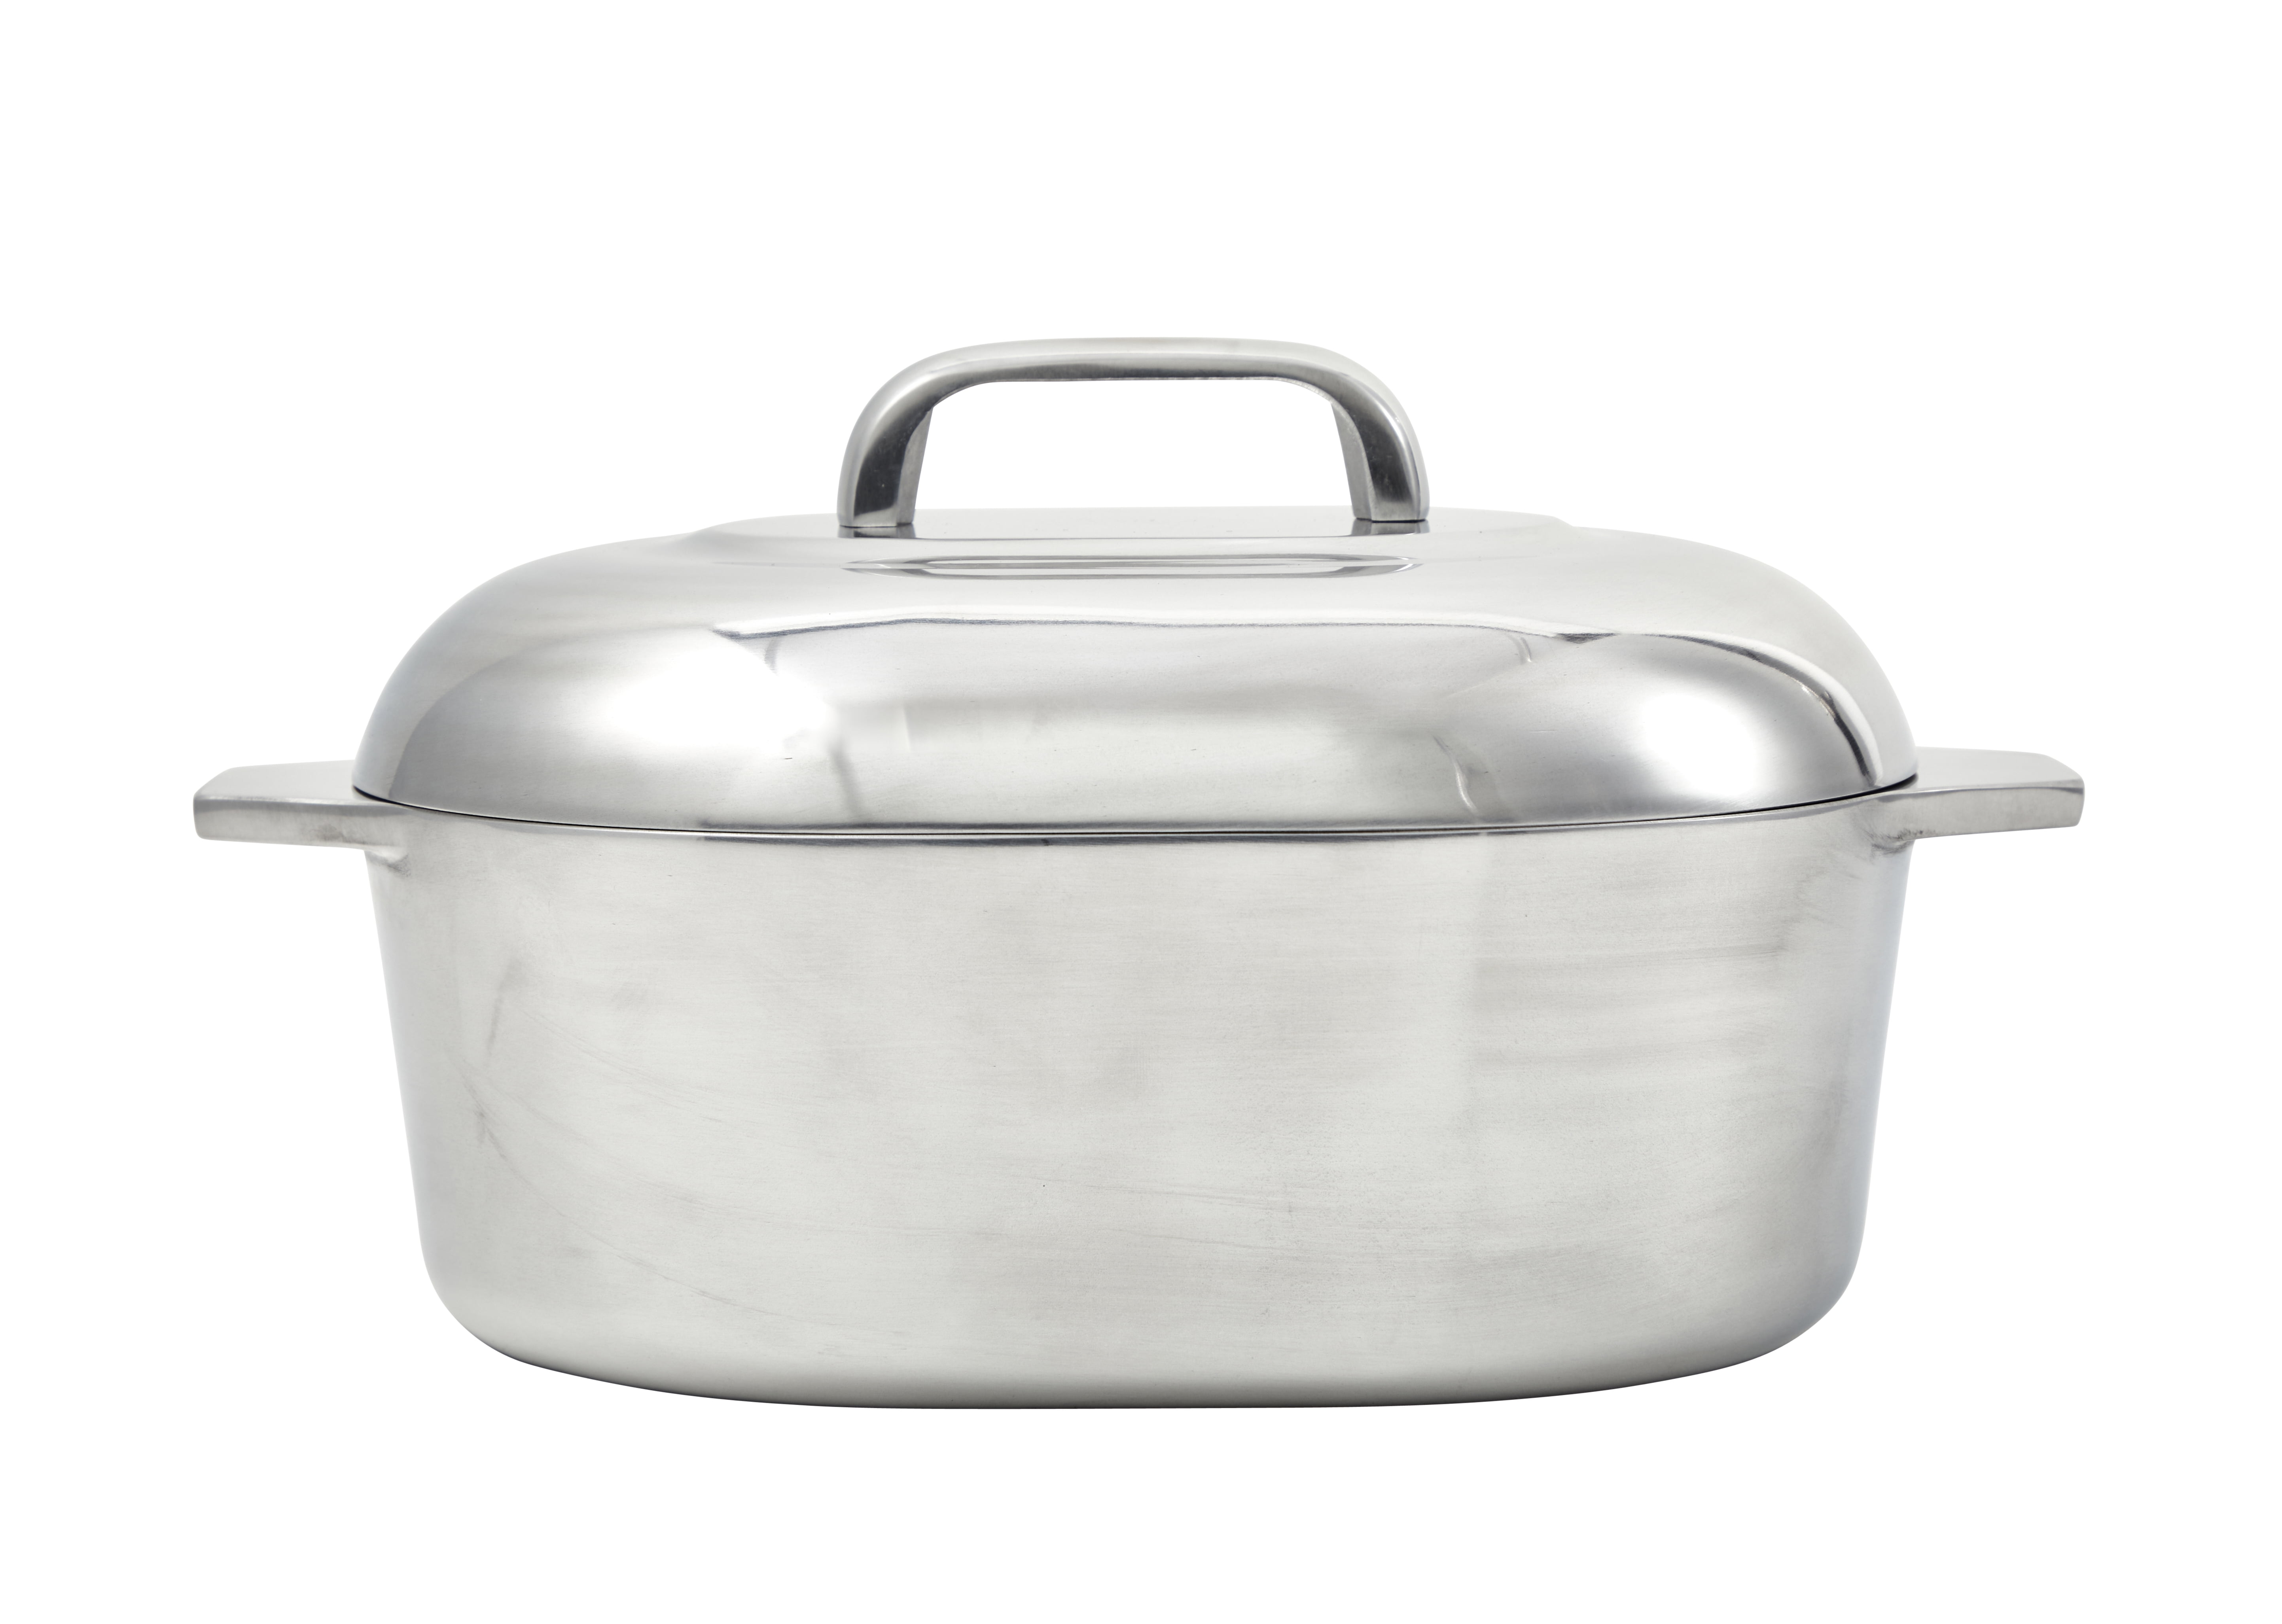 Imusa 11 inch Cajun Oval Cast Aluminum Roaster Pan with Lid, 1 Count